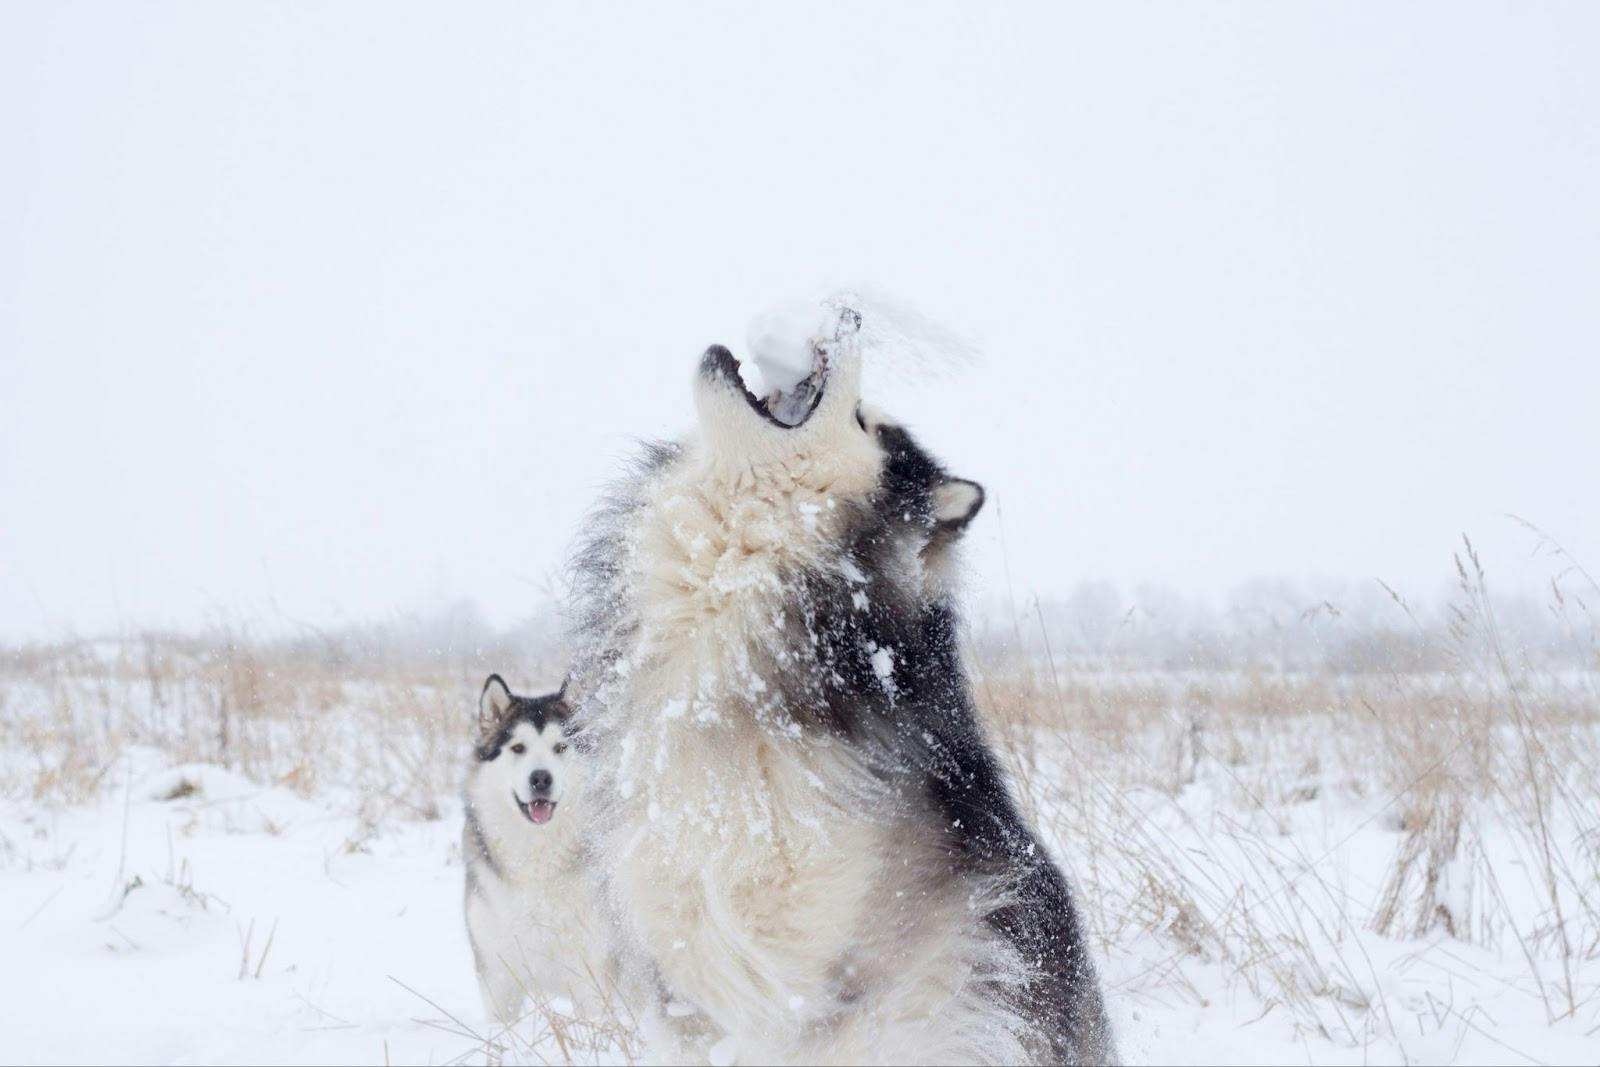 Huskie dog howling in the snow